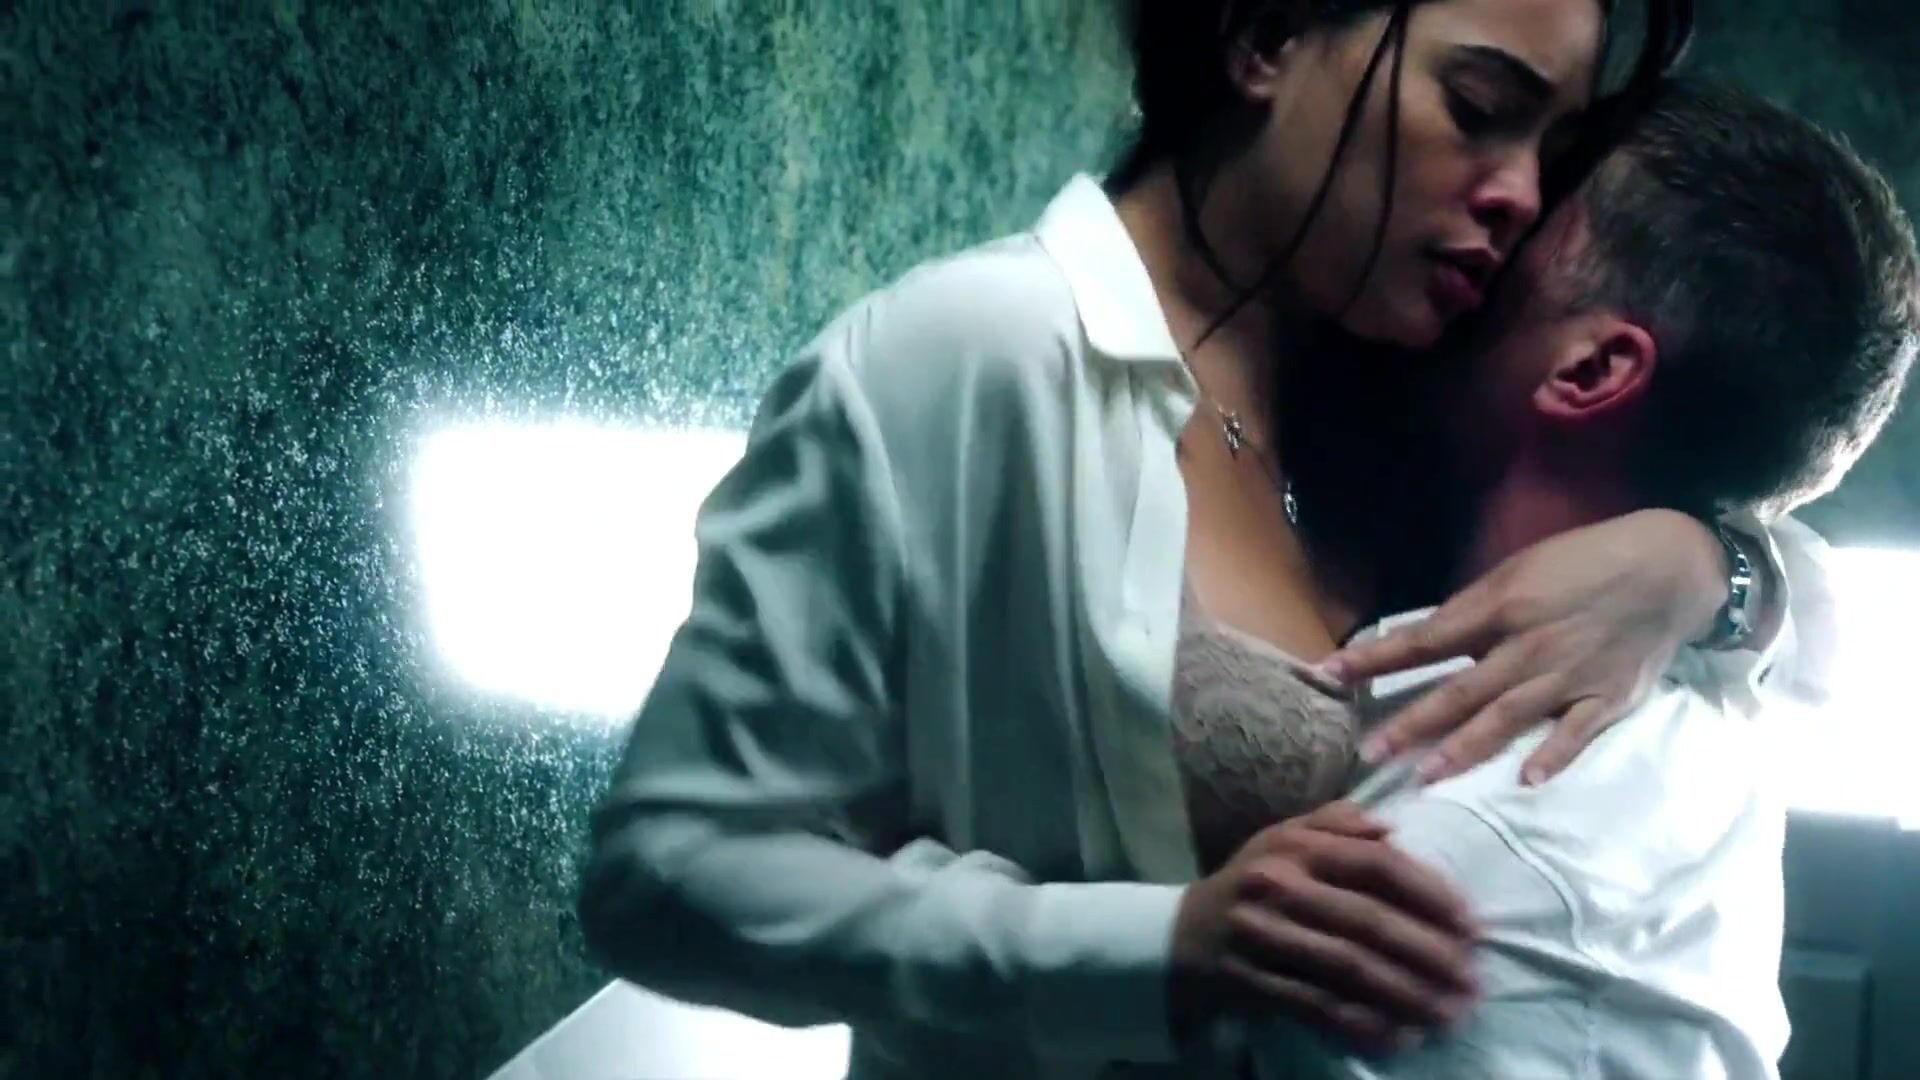 SexLikeReal Man entices Natalie Martinez and finally hooks up with her in elevator in Into the Dark Van - 1